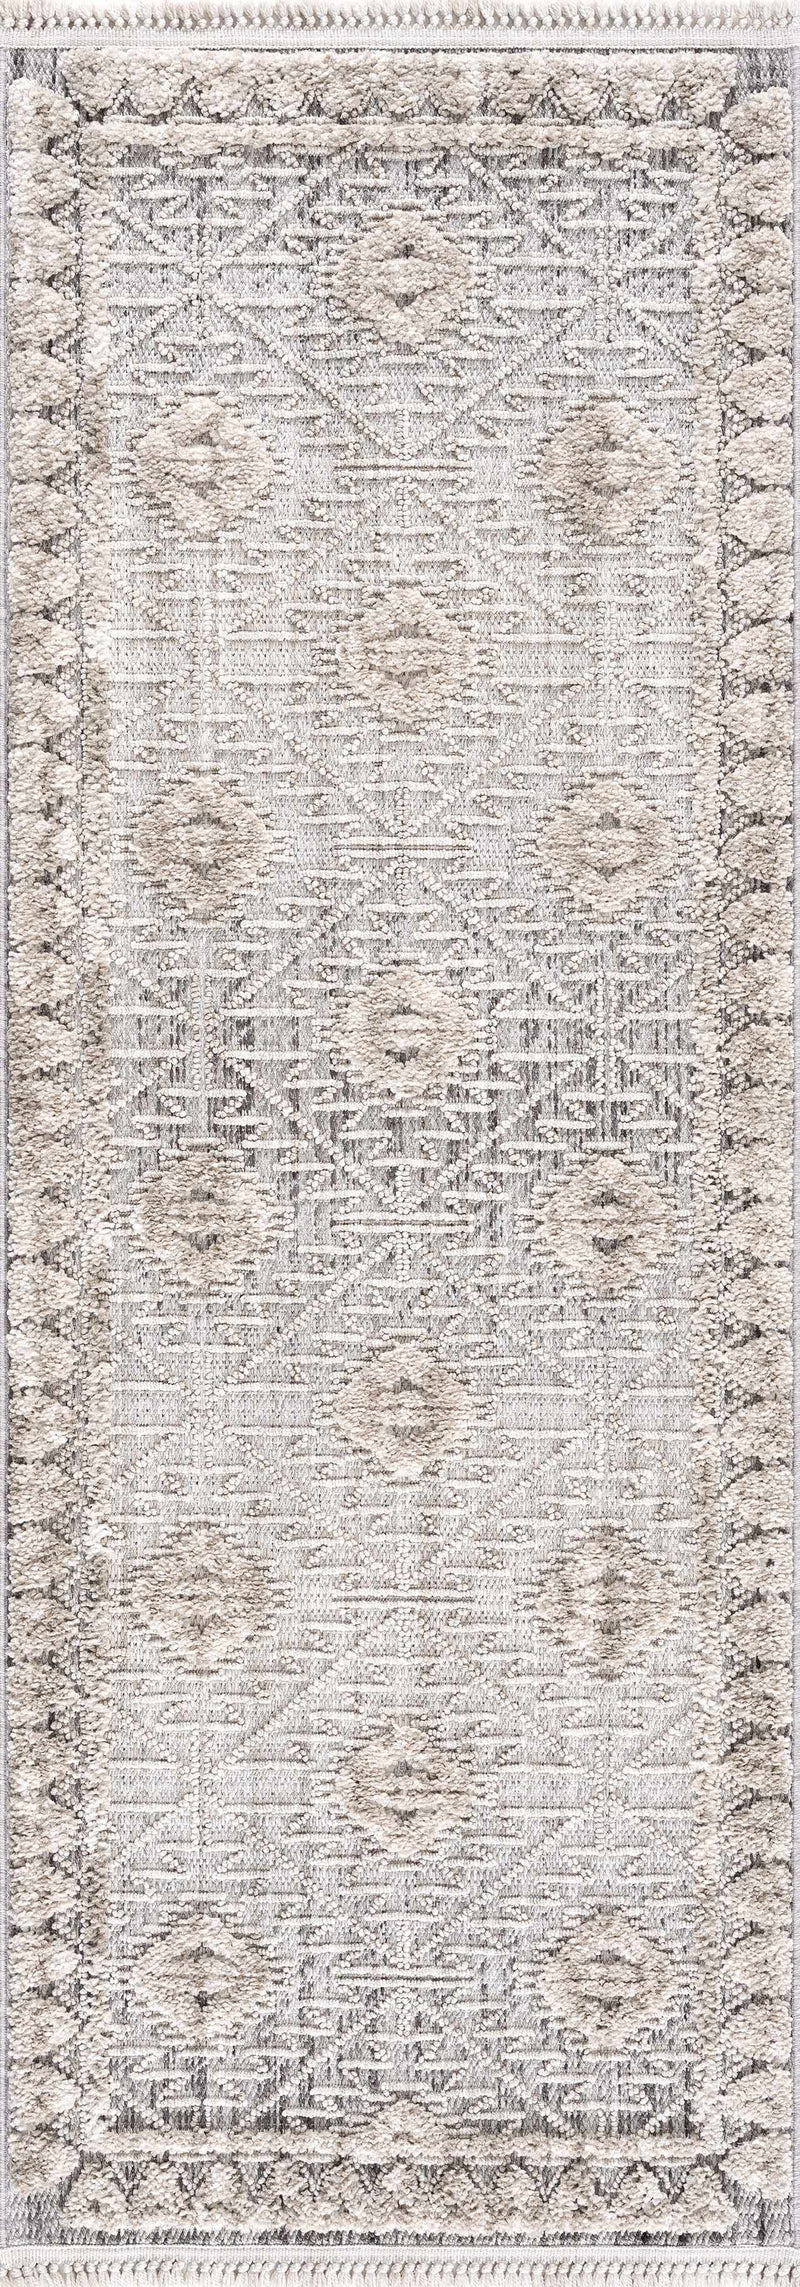 Boutique Rugs - Agoo Area Rug Rugs Boutique Rugs 2'7" x 7'3" Runner 